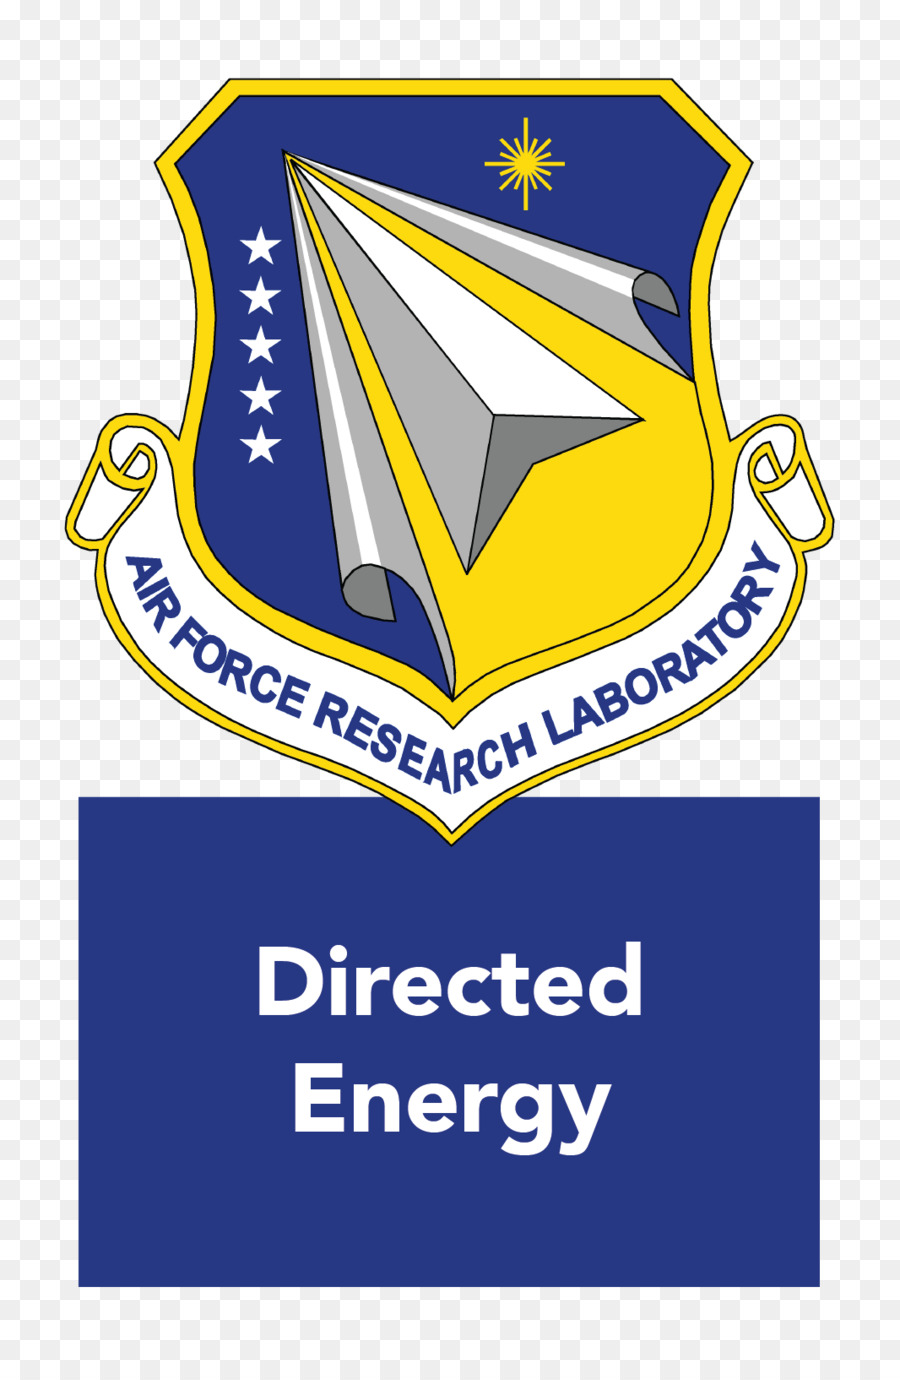 Air Force Research Laboratory 711th Human Performance Wing der United States Air Force auf der Kirtland Air Force Base - US Army Soldiers Systems Center